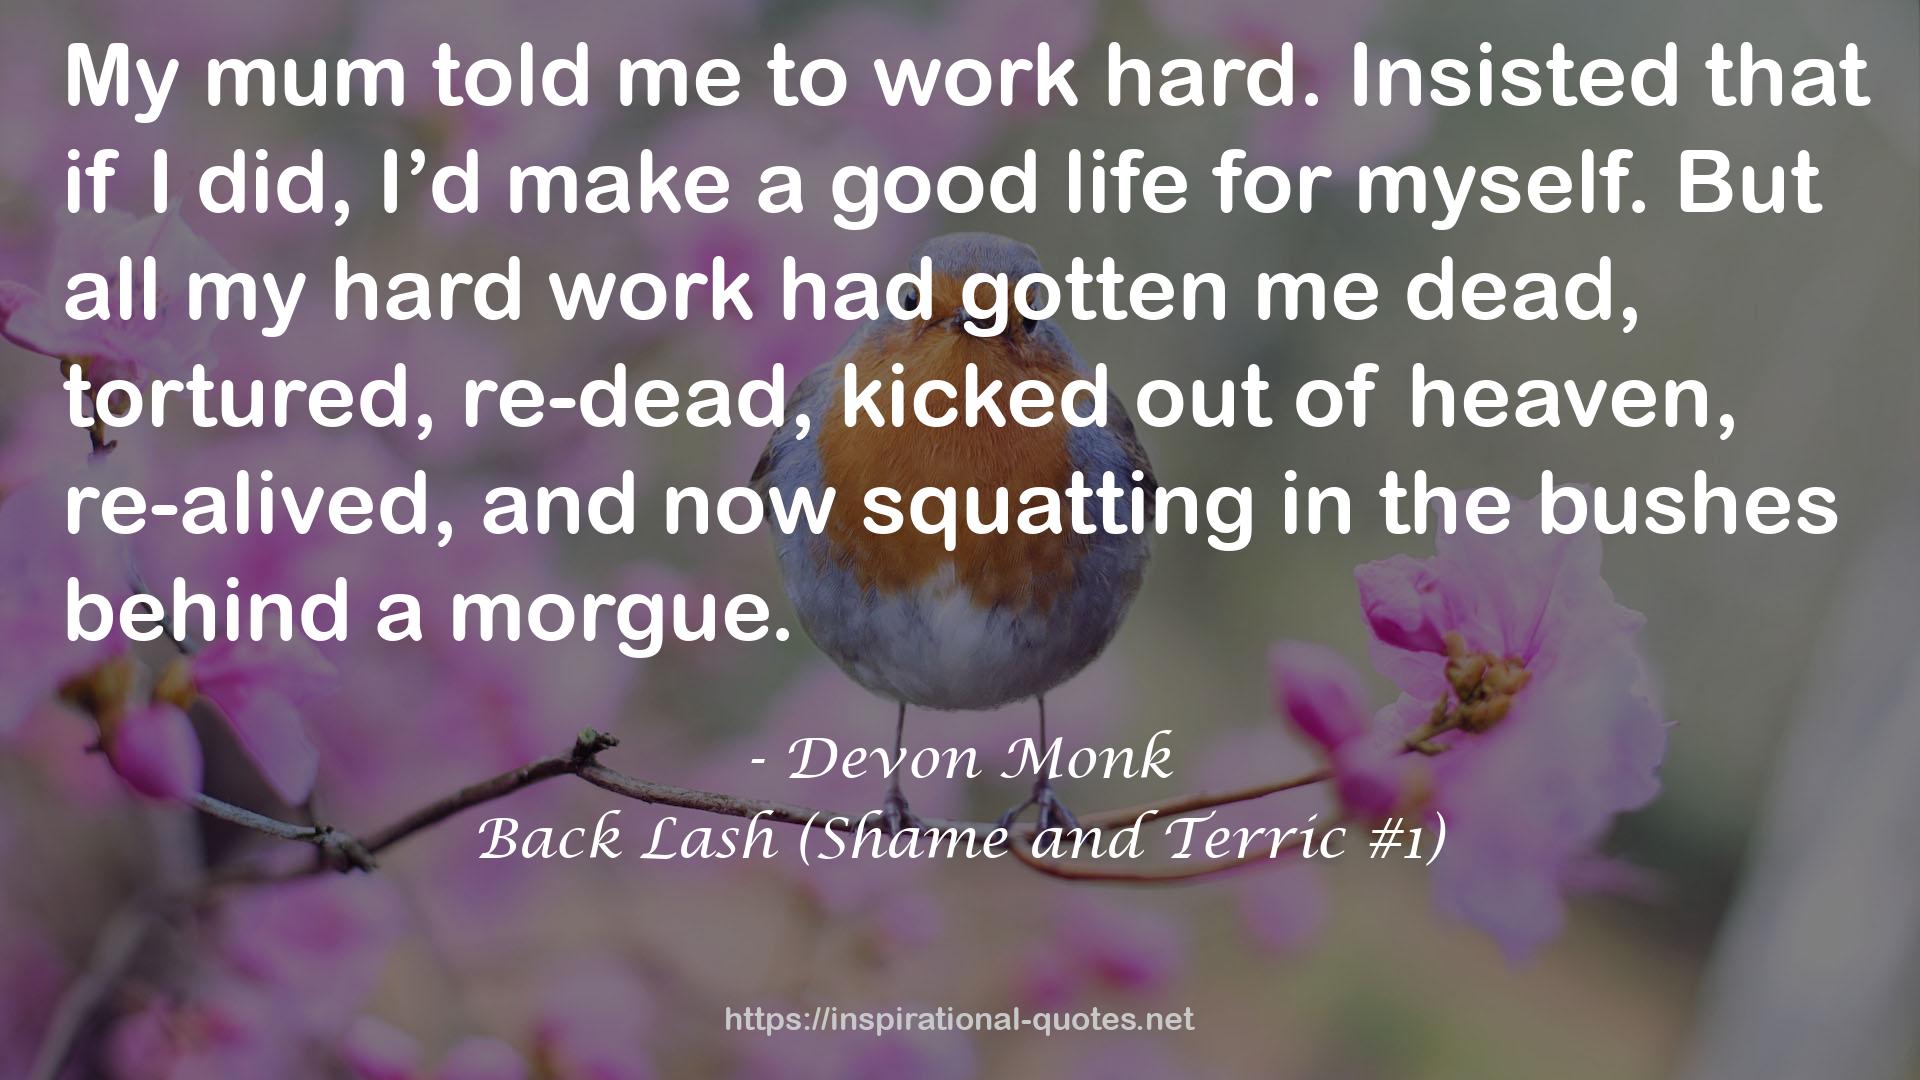 Back Lash (Shame and Terric #1) QUOTES